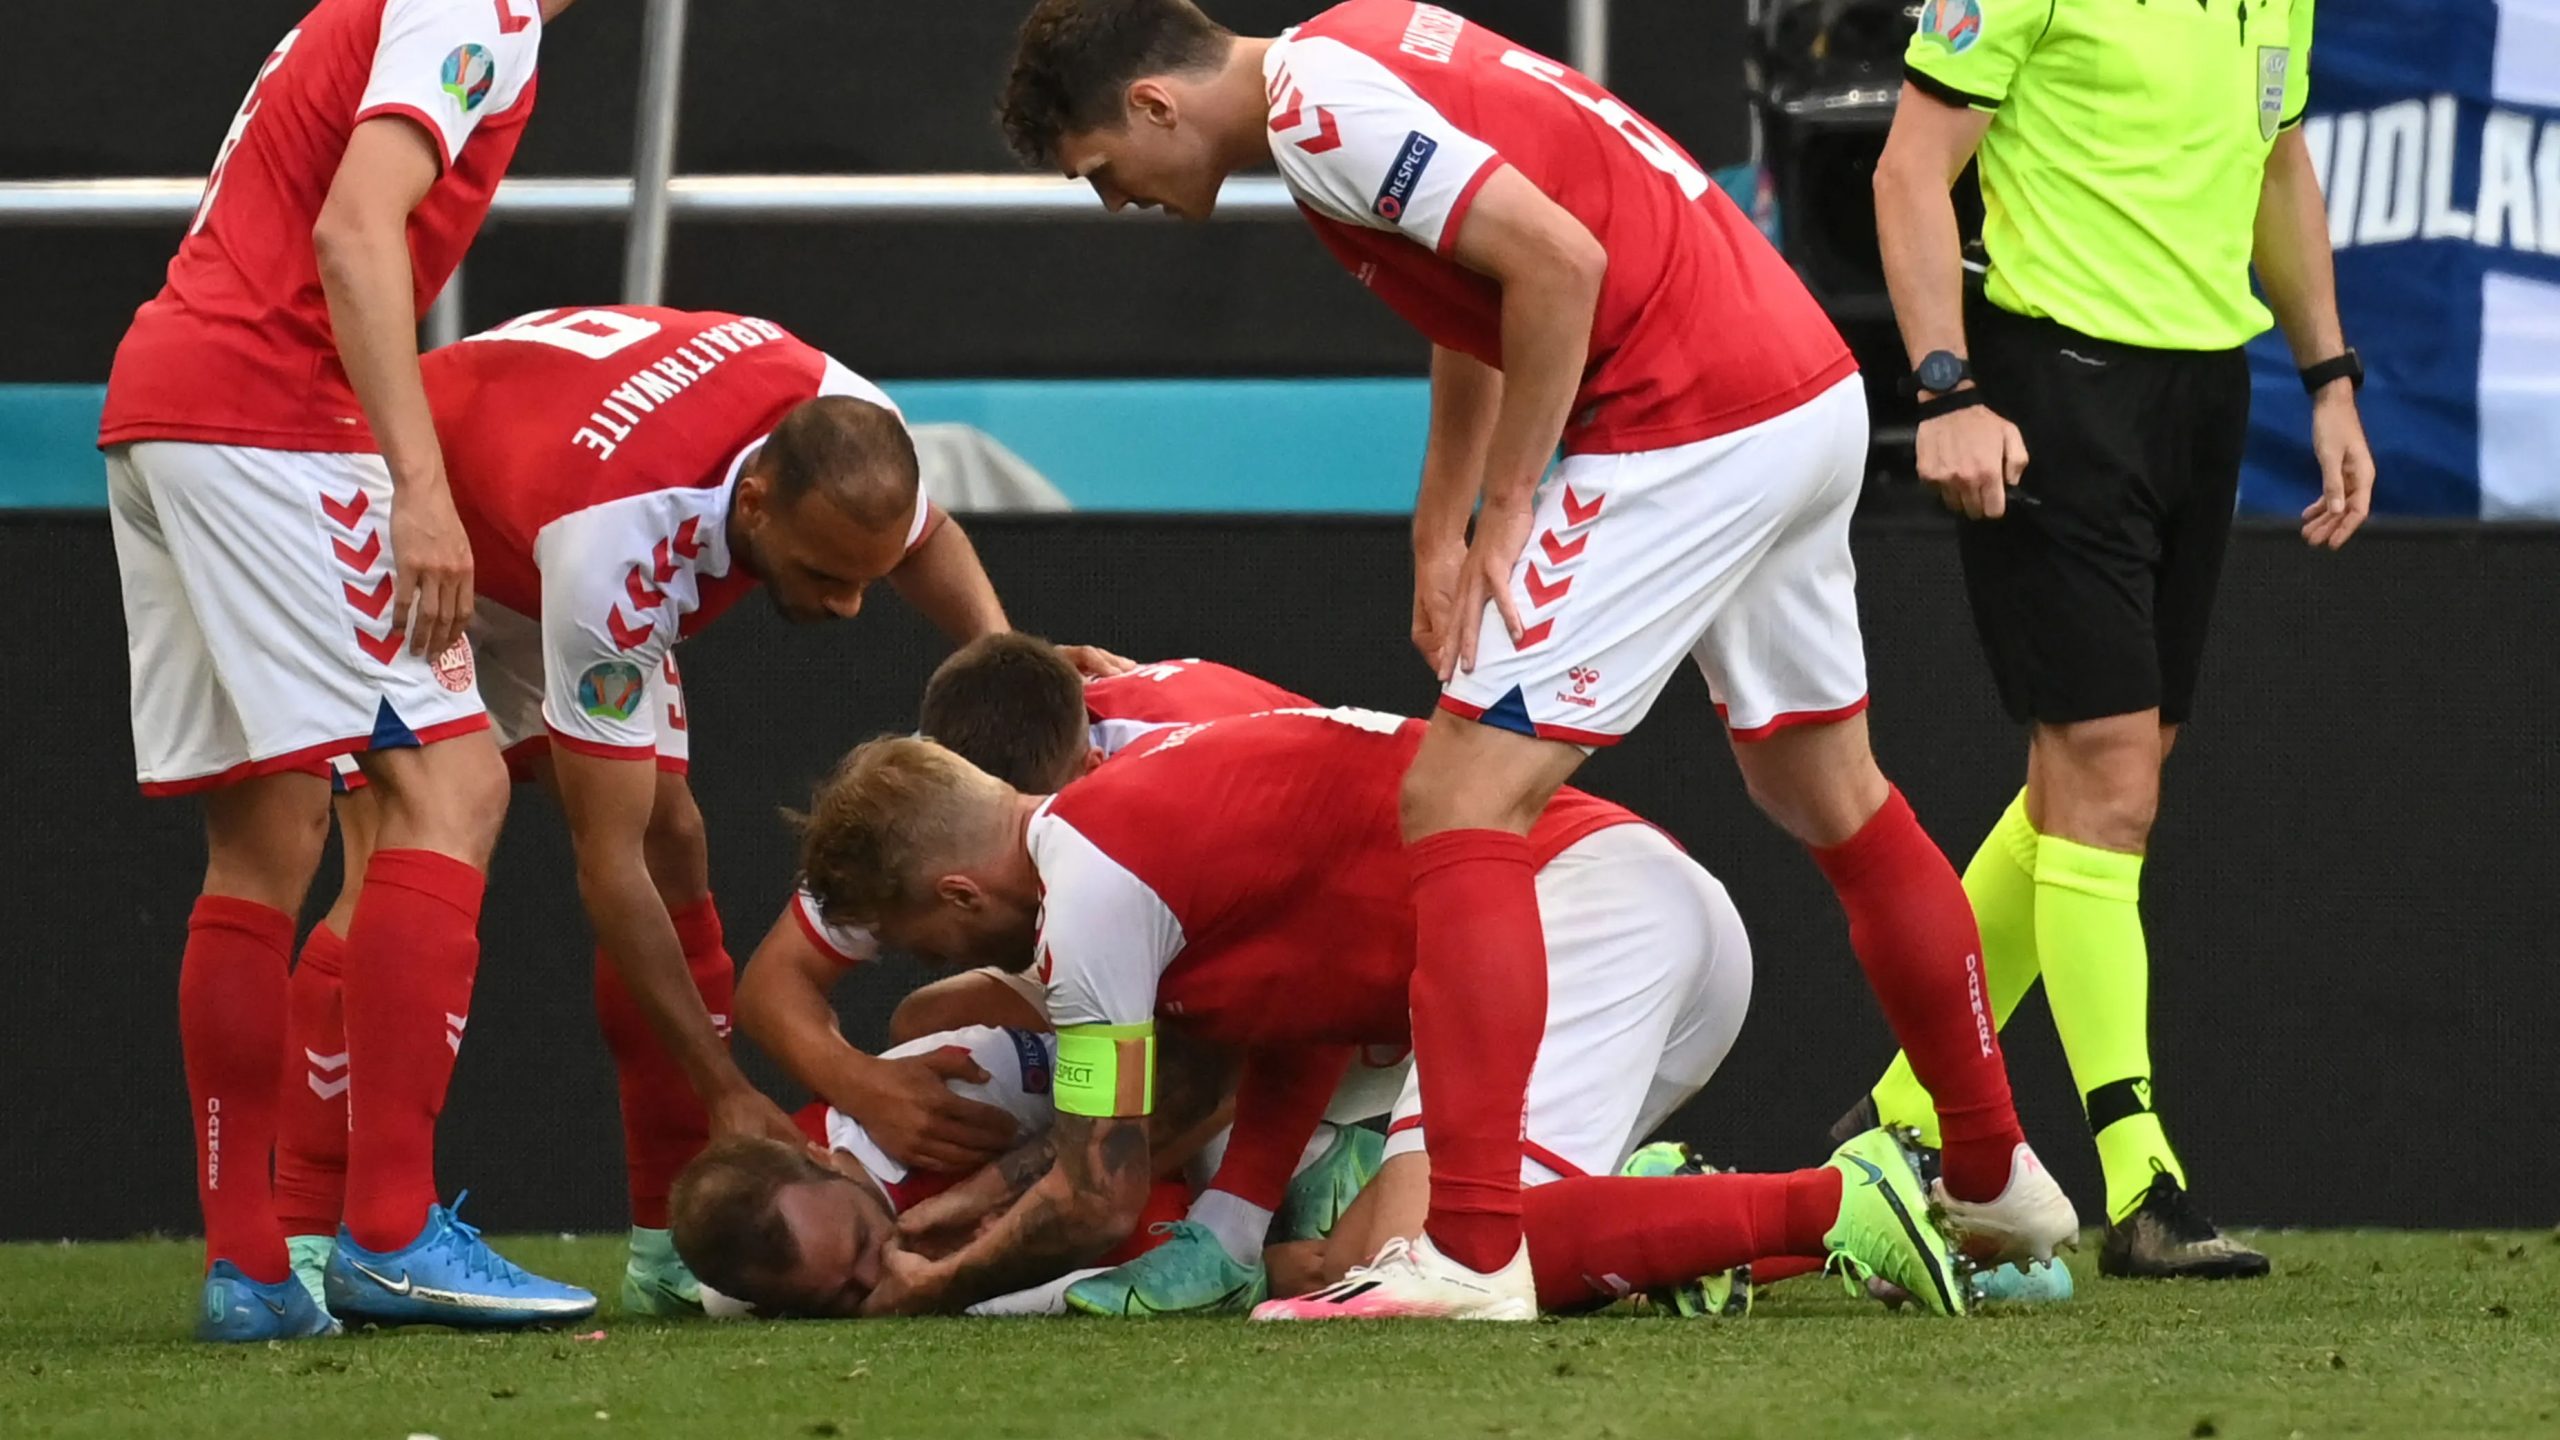 Christian Eriksen stable after collapsing on field in Euro 2020 game